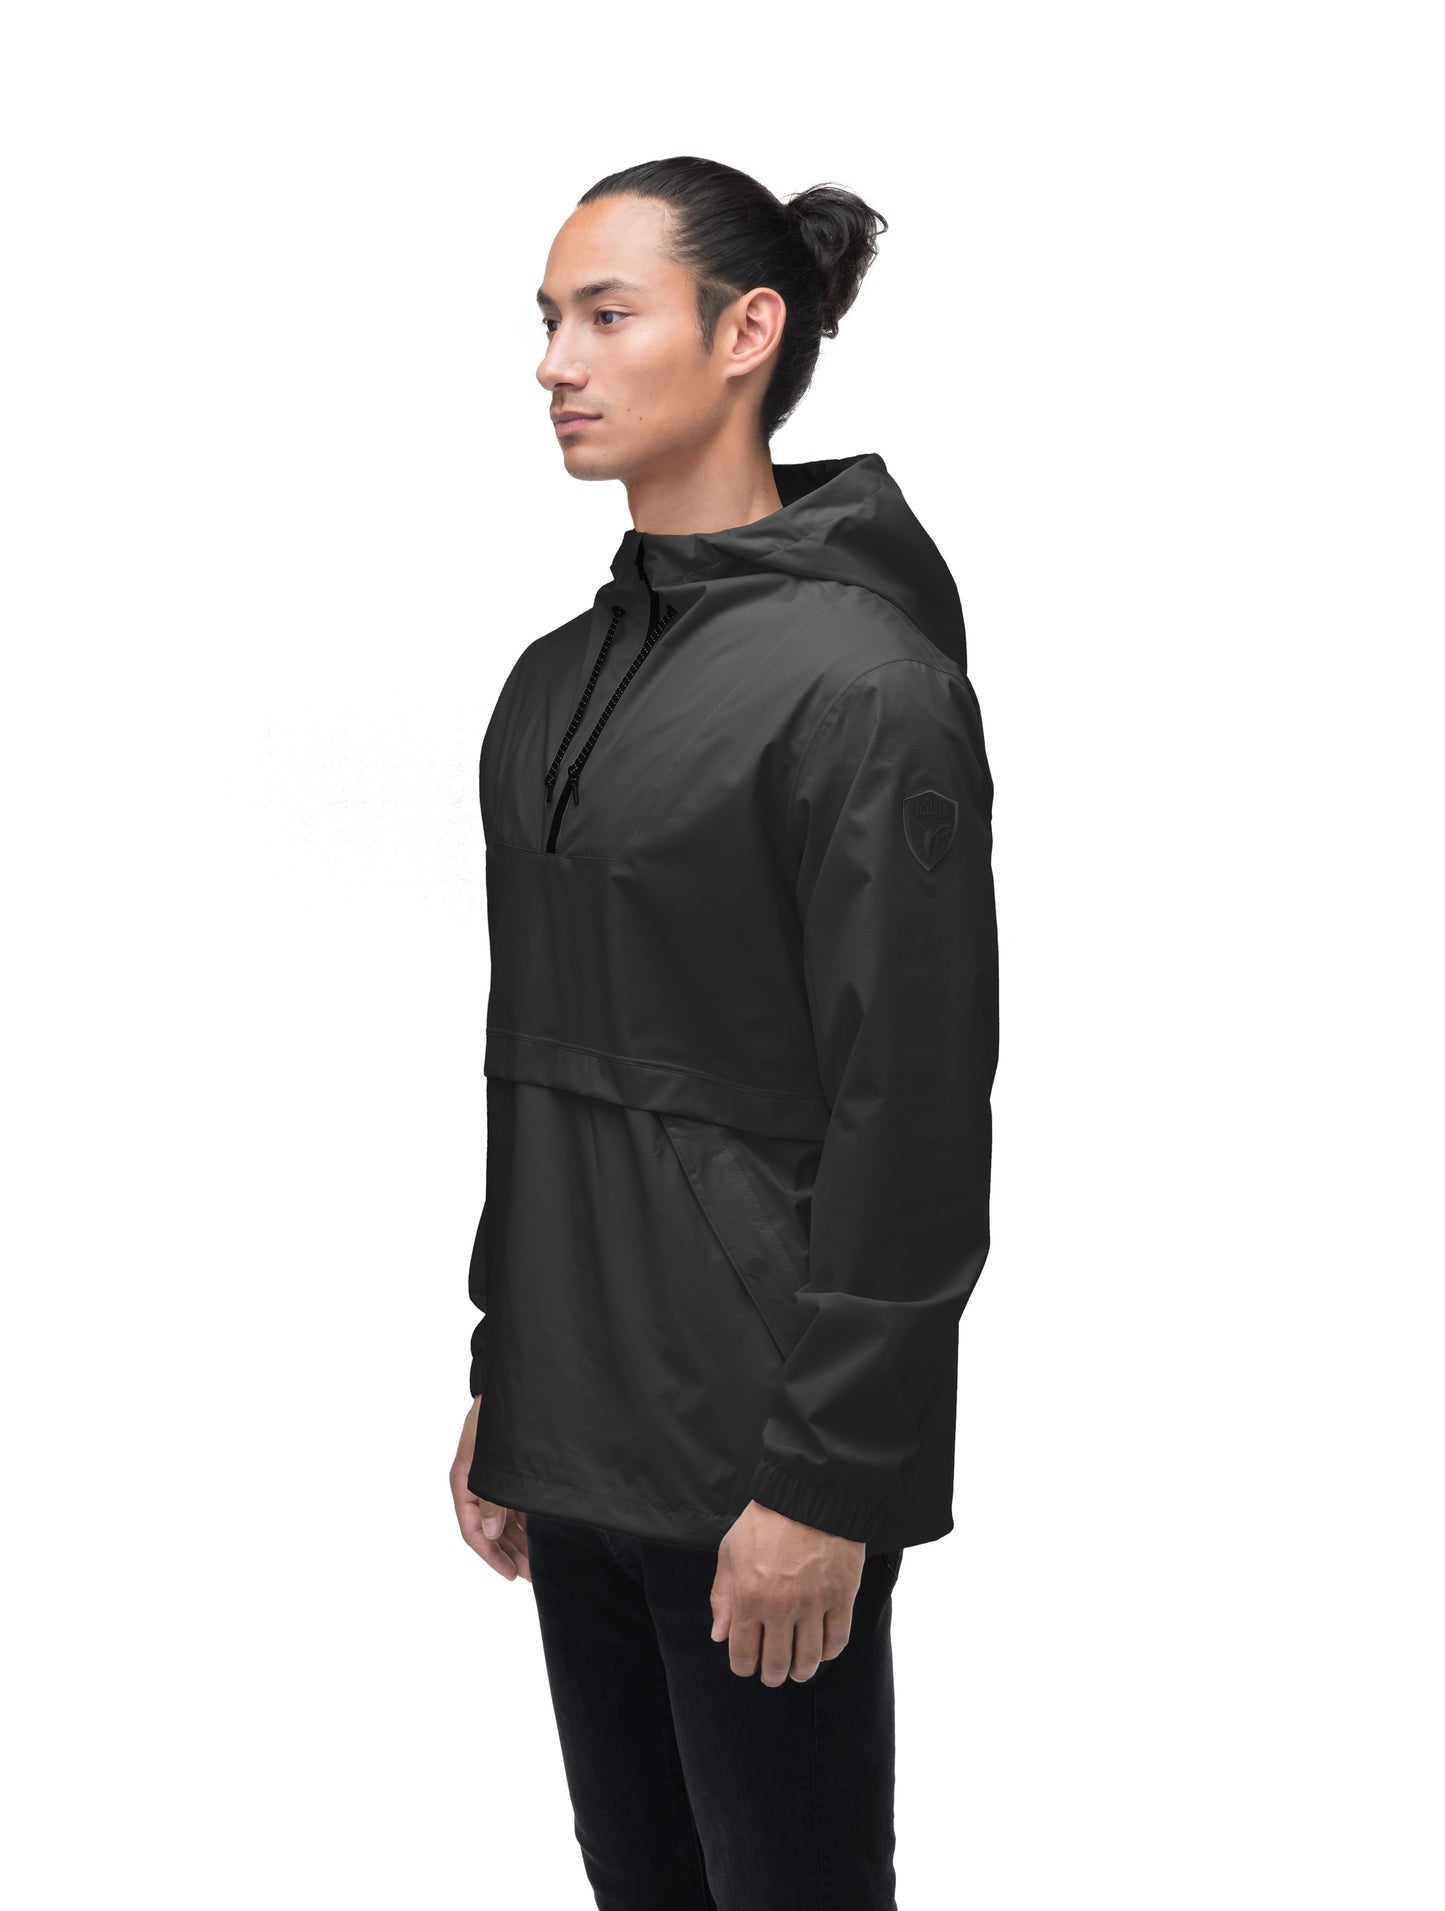 Men's hip length hooded pullover anorak with zipper at collar in Black